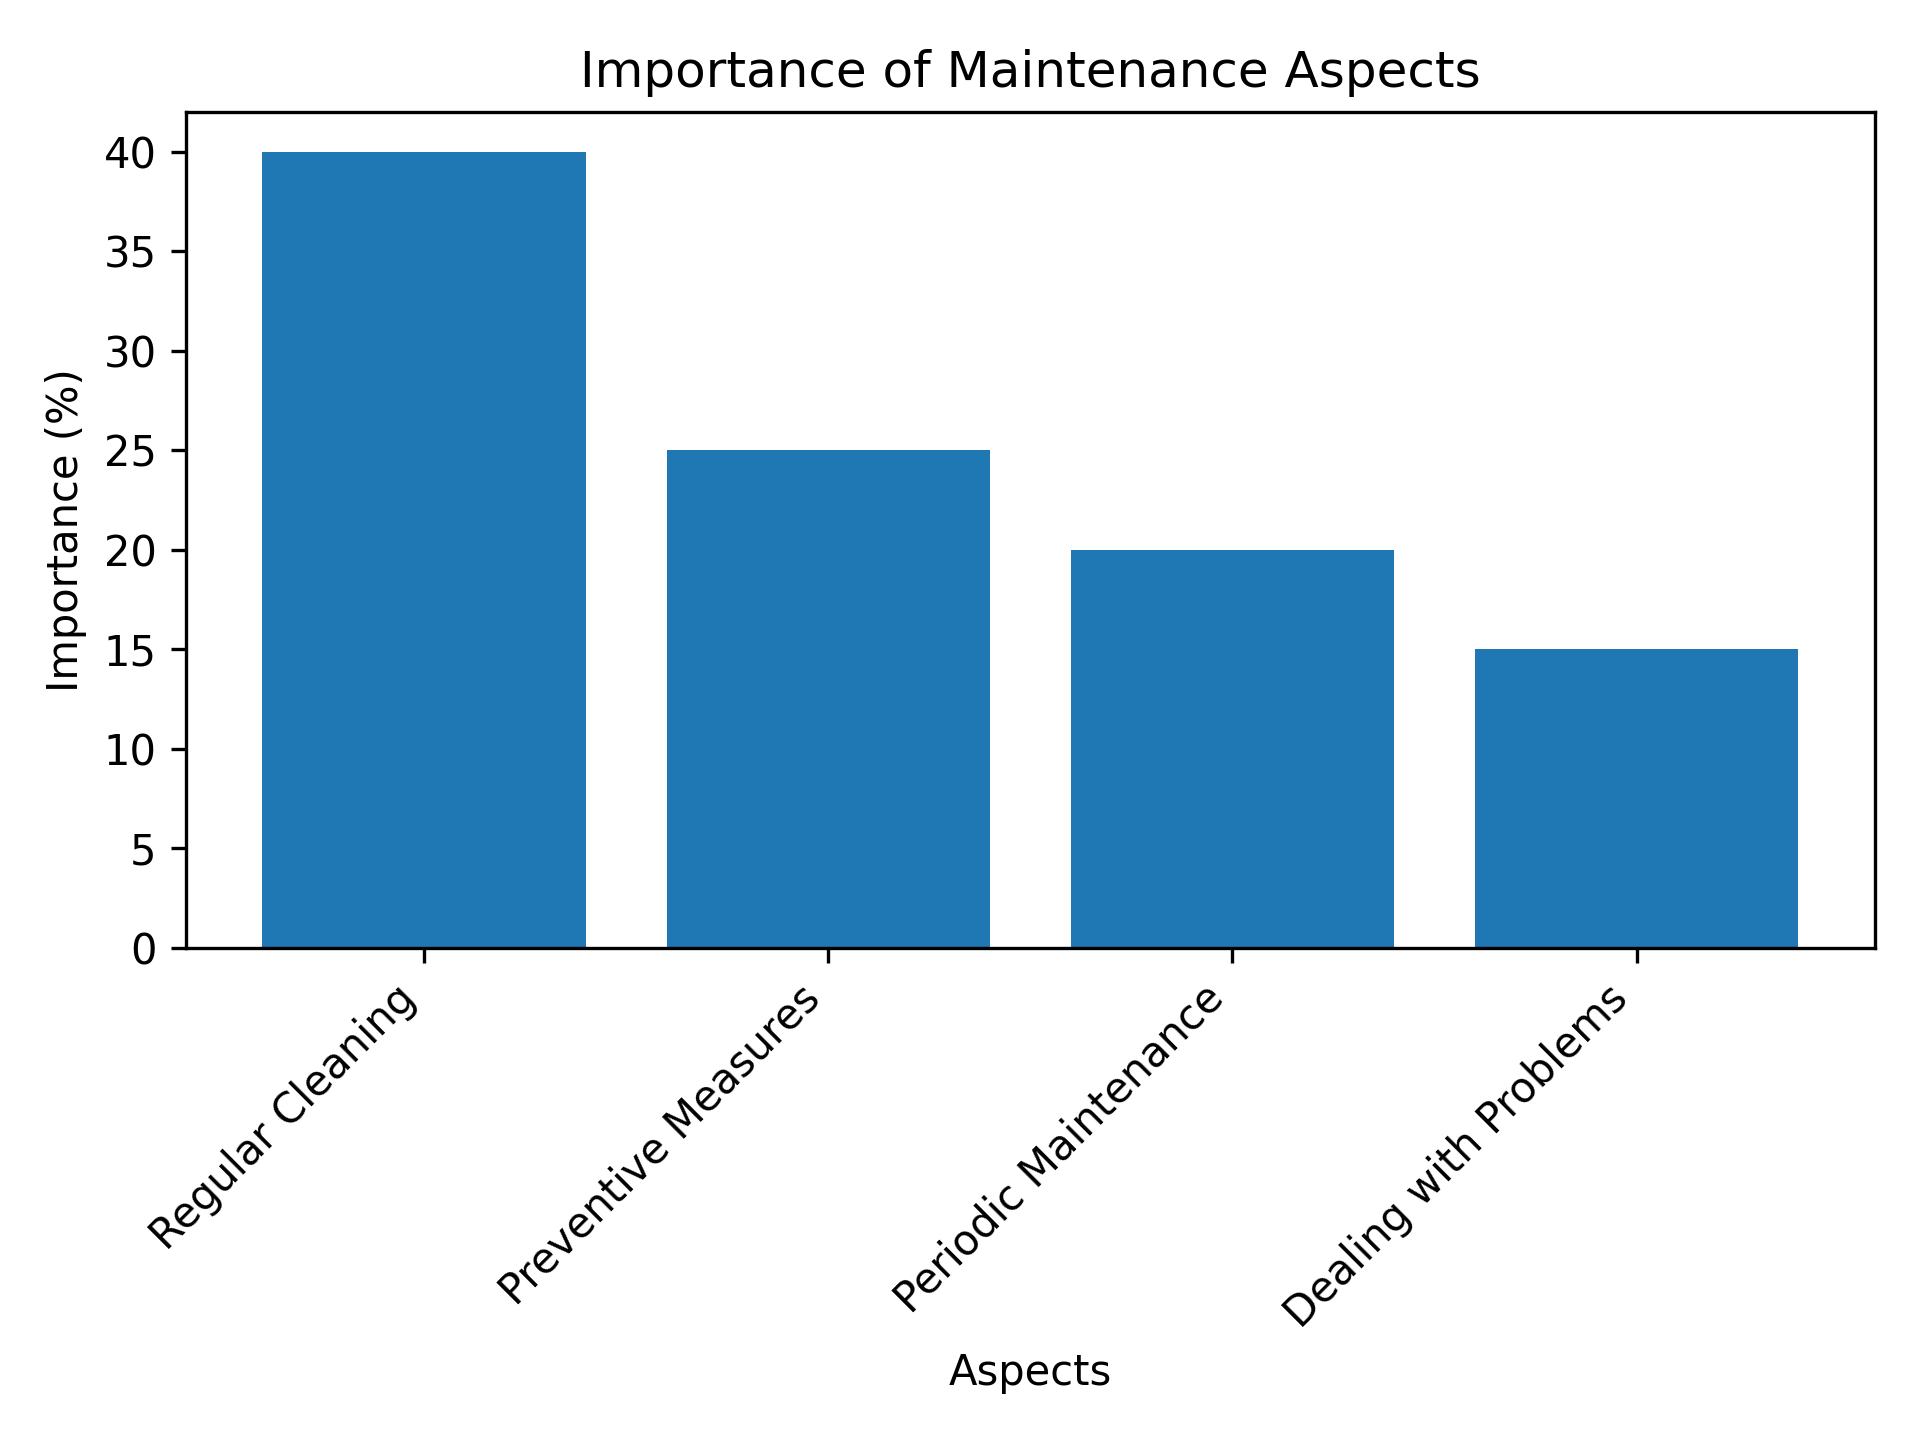 This bar graph visualizes the importance of different maintenance aspects, including regular cleaning, preventive measures, periodic maintenance, and dealing with problems.